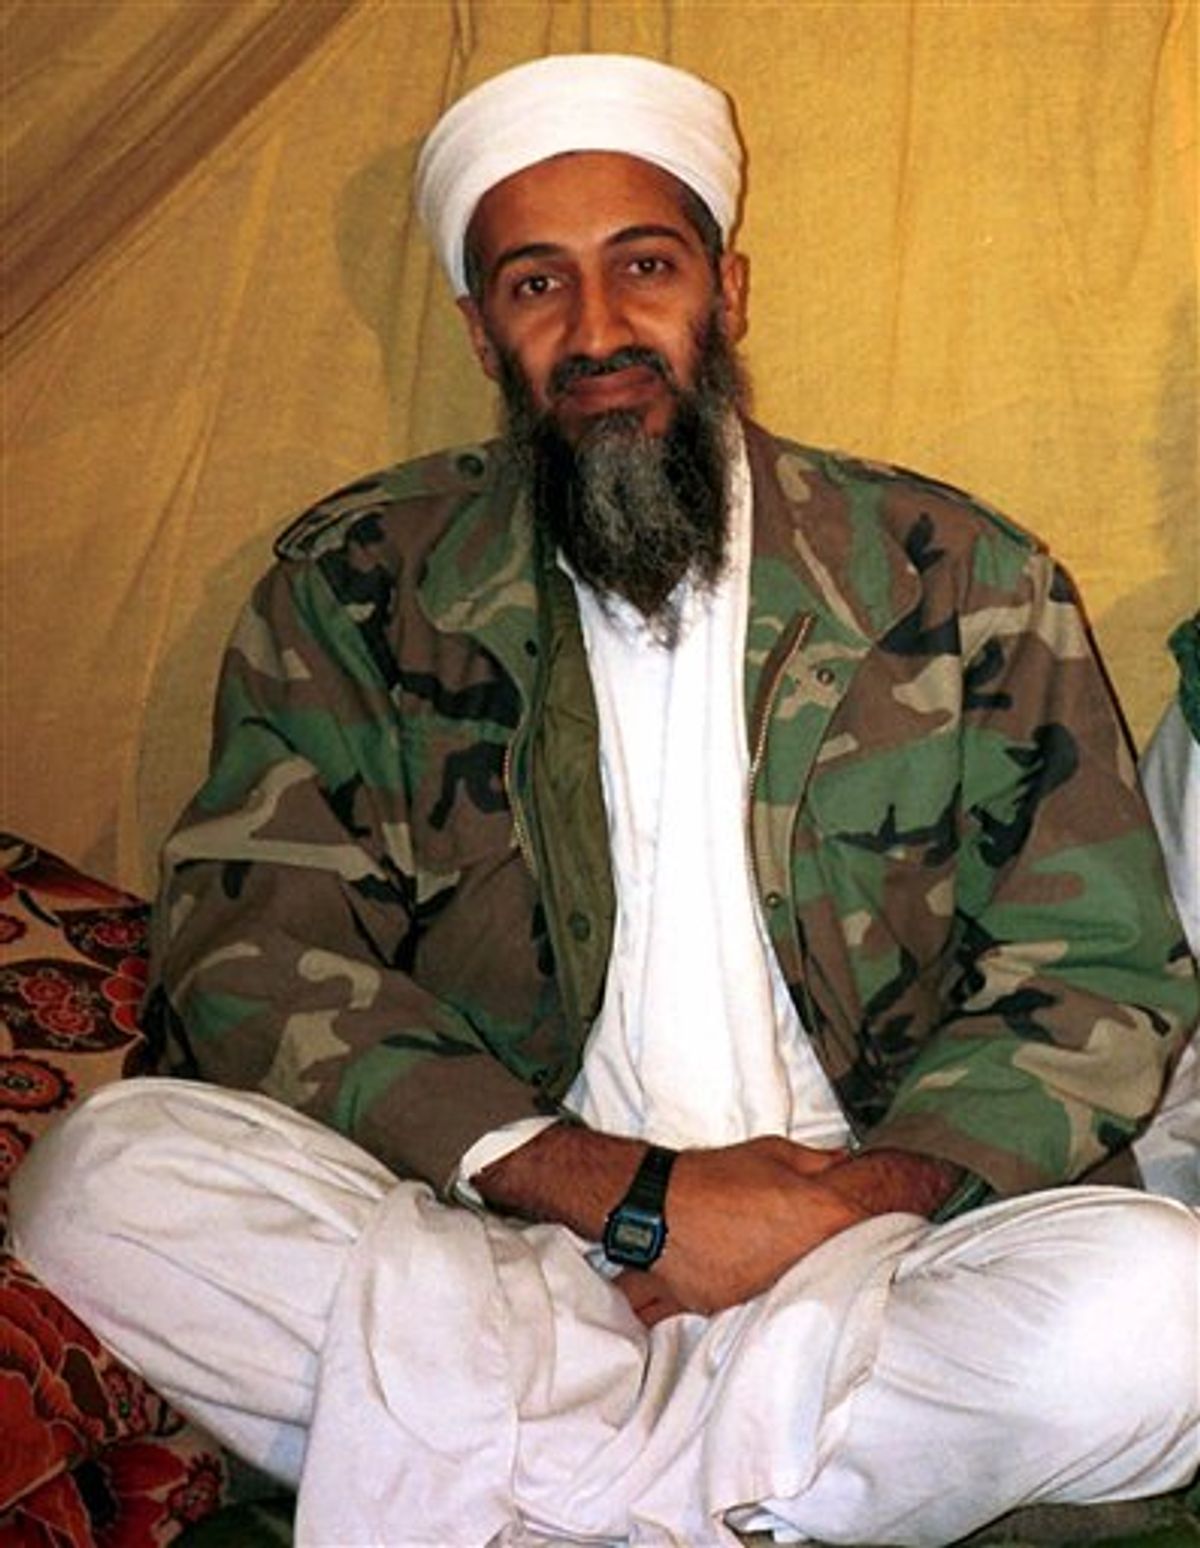 This is an undated file photo shows then-al Qaida leader Osama bin Laden, in Afghanistan. After Navy SEALs killed Osama bin Laden, the White House released a photo of President Barack Obama and his cabinet inside the Situation Room, watching the daring raid unfold. Hidden from view, standing just outside the frame of that instantly iconic photograph was a career CIA analyst. In the hunt for the world's most-wanted terrorist, there may have been no one more important. His job for nearly a decade: finding bin Laden. (AP Photo) (AP)